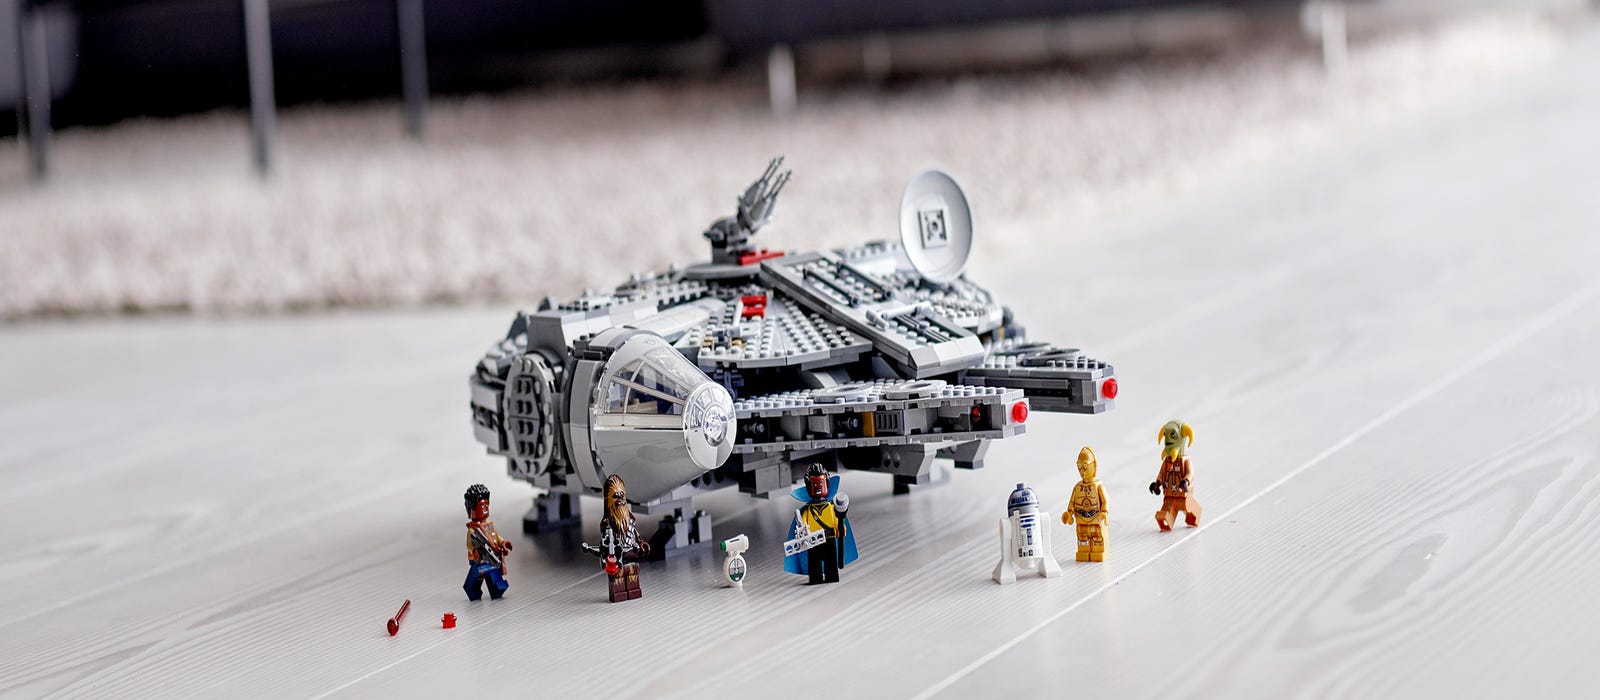 The history of the LEGO® Star Wars™ Millennium Falcon™ sets